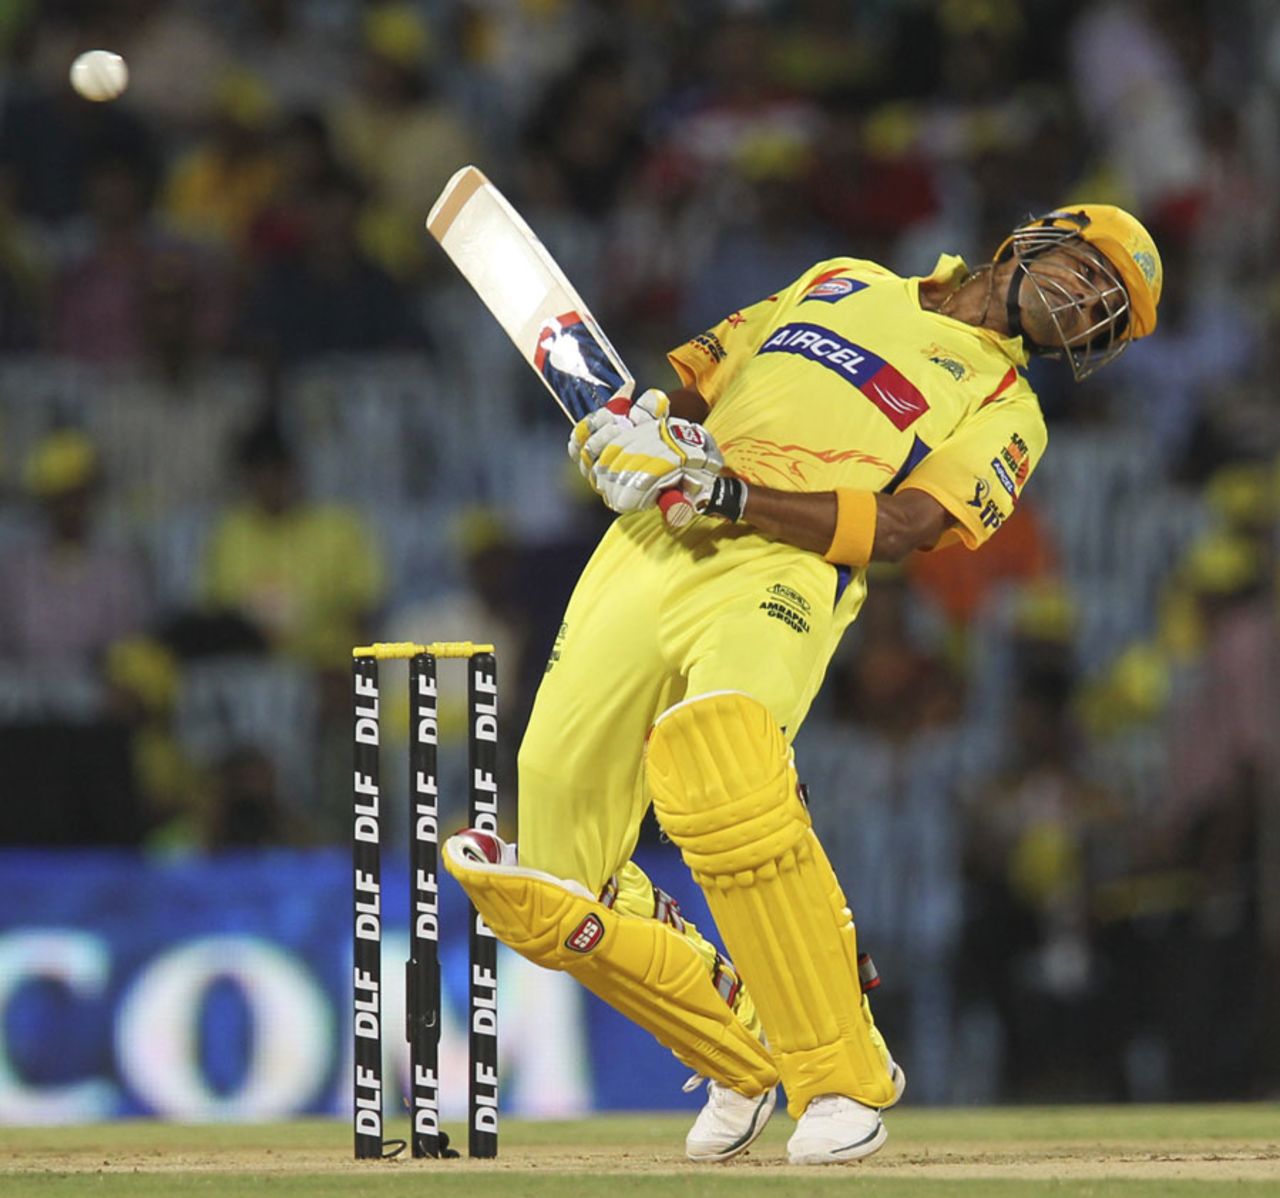 S Badrinath weaves out of the way of a bouncer, Chennai Super Kings v Pune Warriors, IPL, Chennai, April 19, 2012